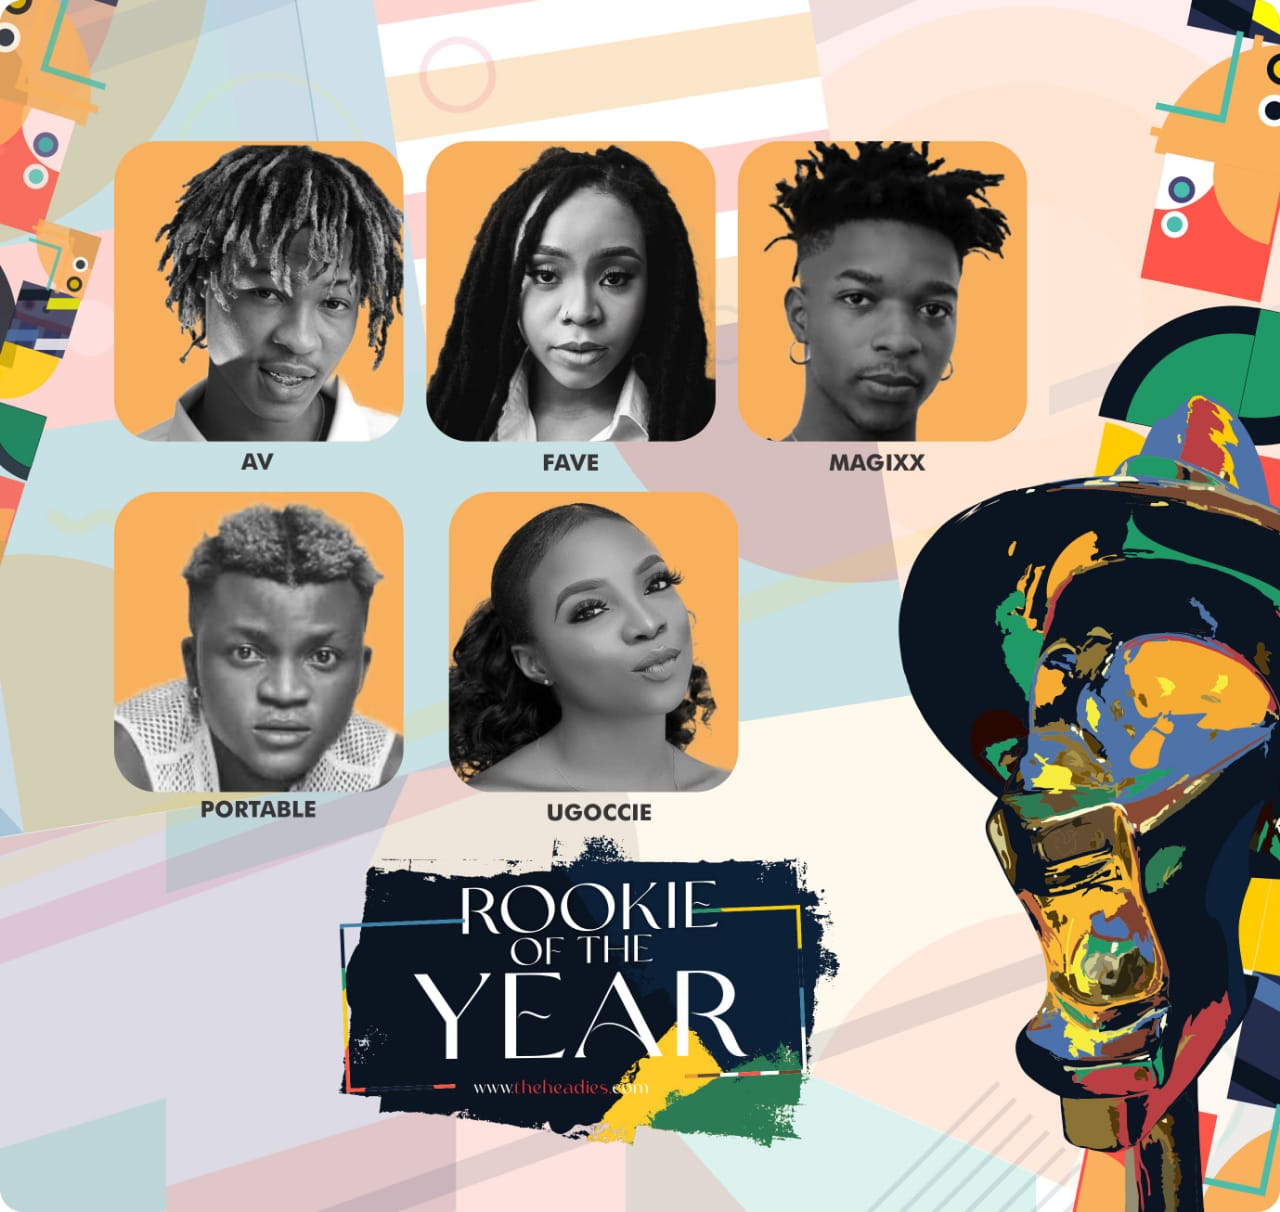 2022 Headies Award Nominees (Full List) - Portable Gets Double Nominations 15475272_img20220524wa0034_jpeg152461e83e4bed7085fbbf8d54eee5d6